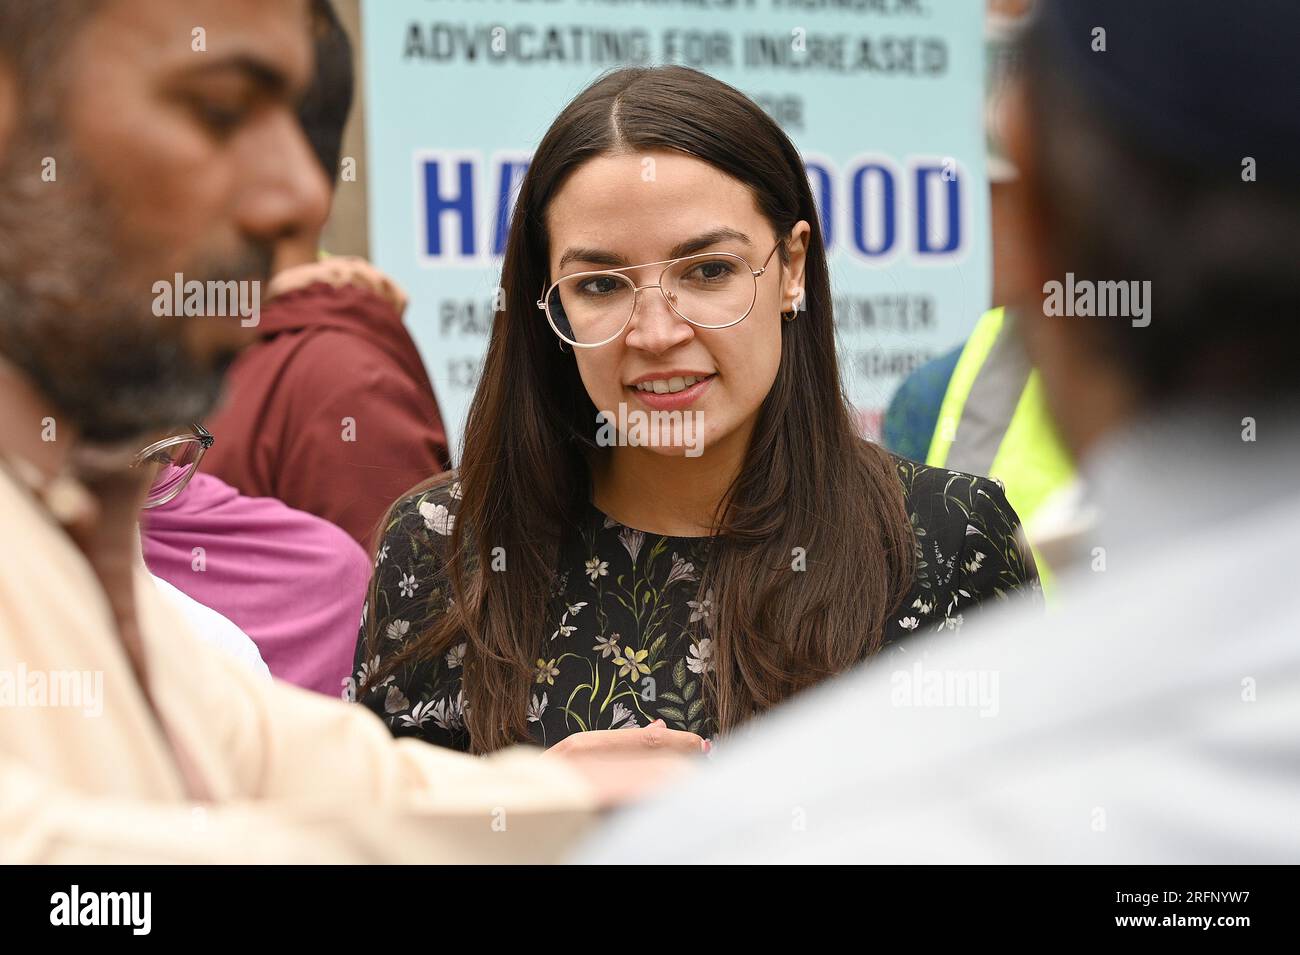 New York, USA. 04th Aug, 2023. Rep. Alexandria Ocasio-Cortez helps distribute food to people suffering from food insecurities at the Parkchester Islamic Center in the New York City borough of the Bronx, NY, August 4, 2023. Rep. Ocasio-Cortez outlined her efforts to increase access to halal and kosher food in the 2023 federal ‘Farm bill', as Muslim and Jewish families struggle to afford food that meets their faith's dietary guidelines. (Photo by Anthony Behar/Sipa USA) Credit: Sipa USA/Alamy Live News Stock Photo